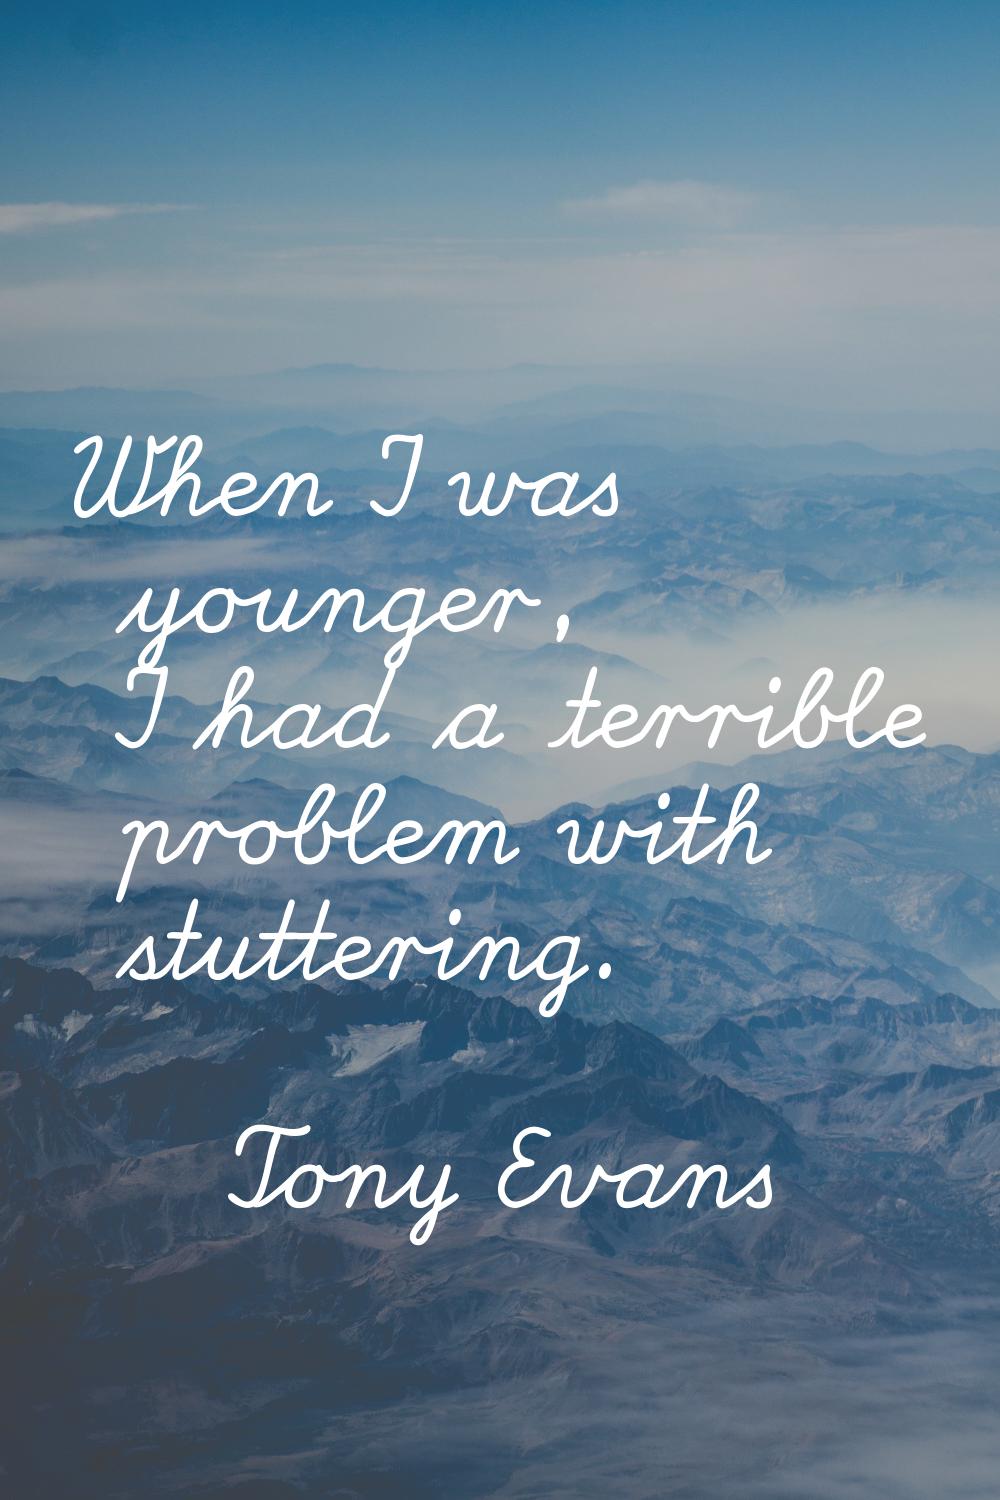 When I was younger, I had a terrible problem with stuttering.